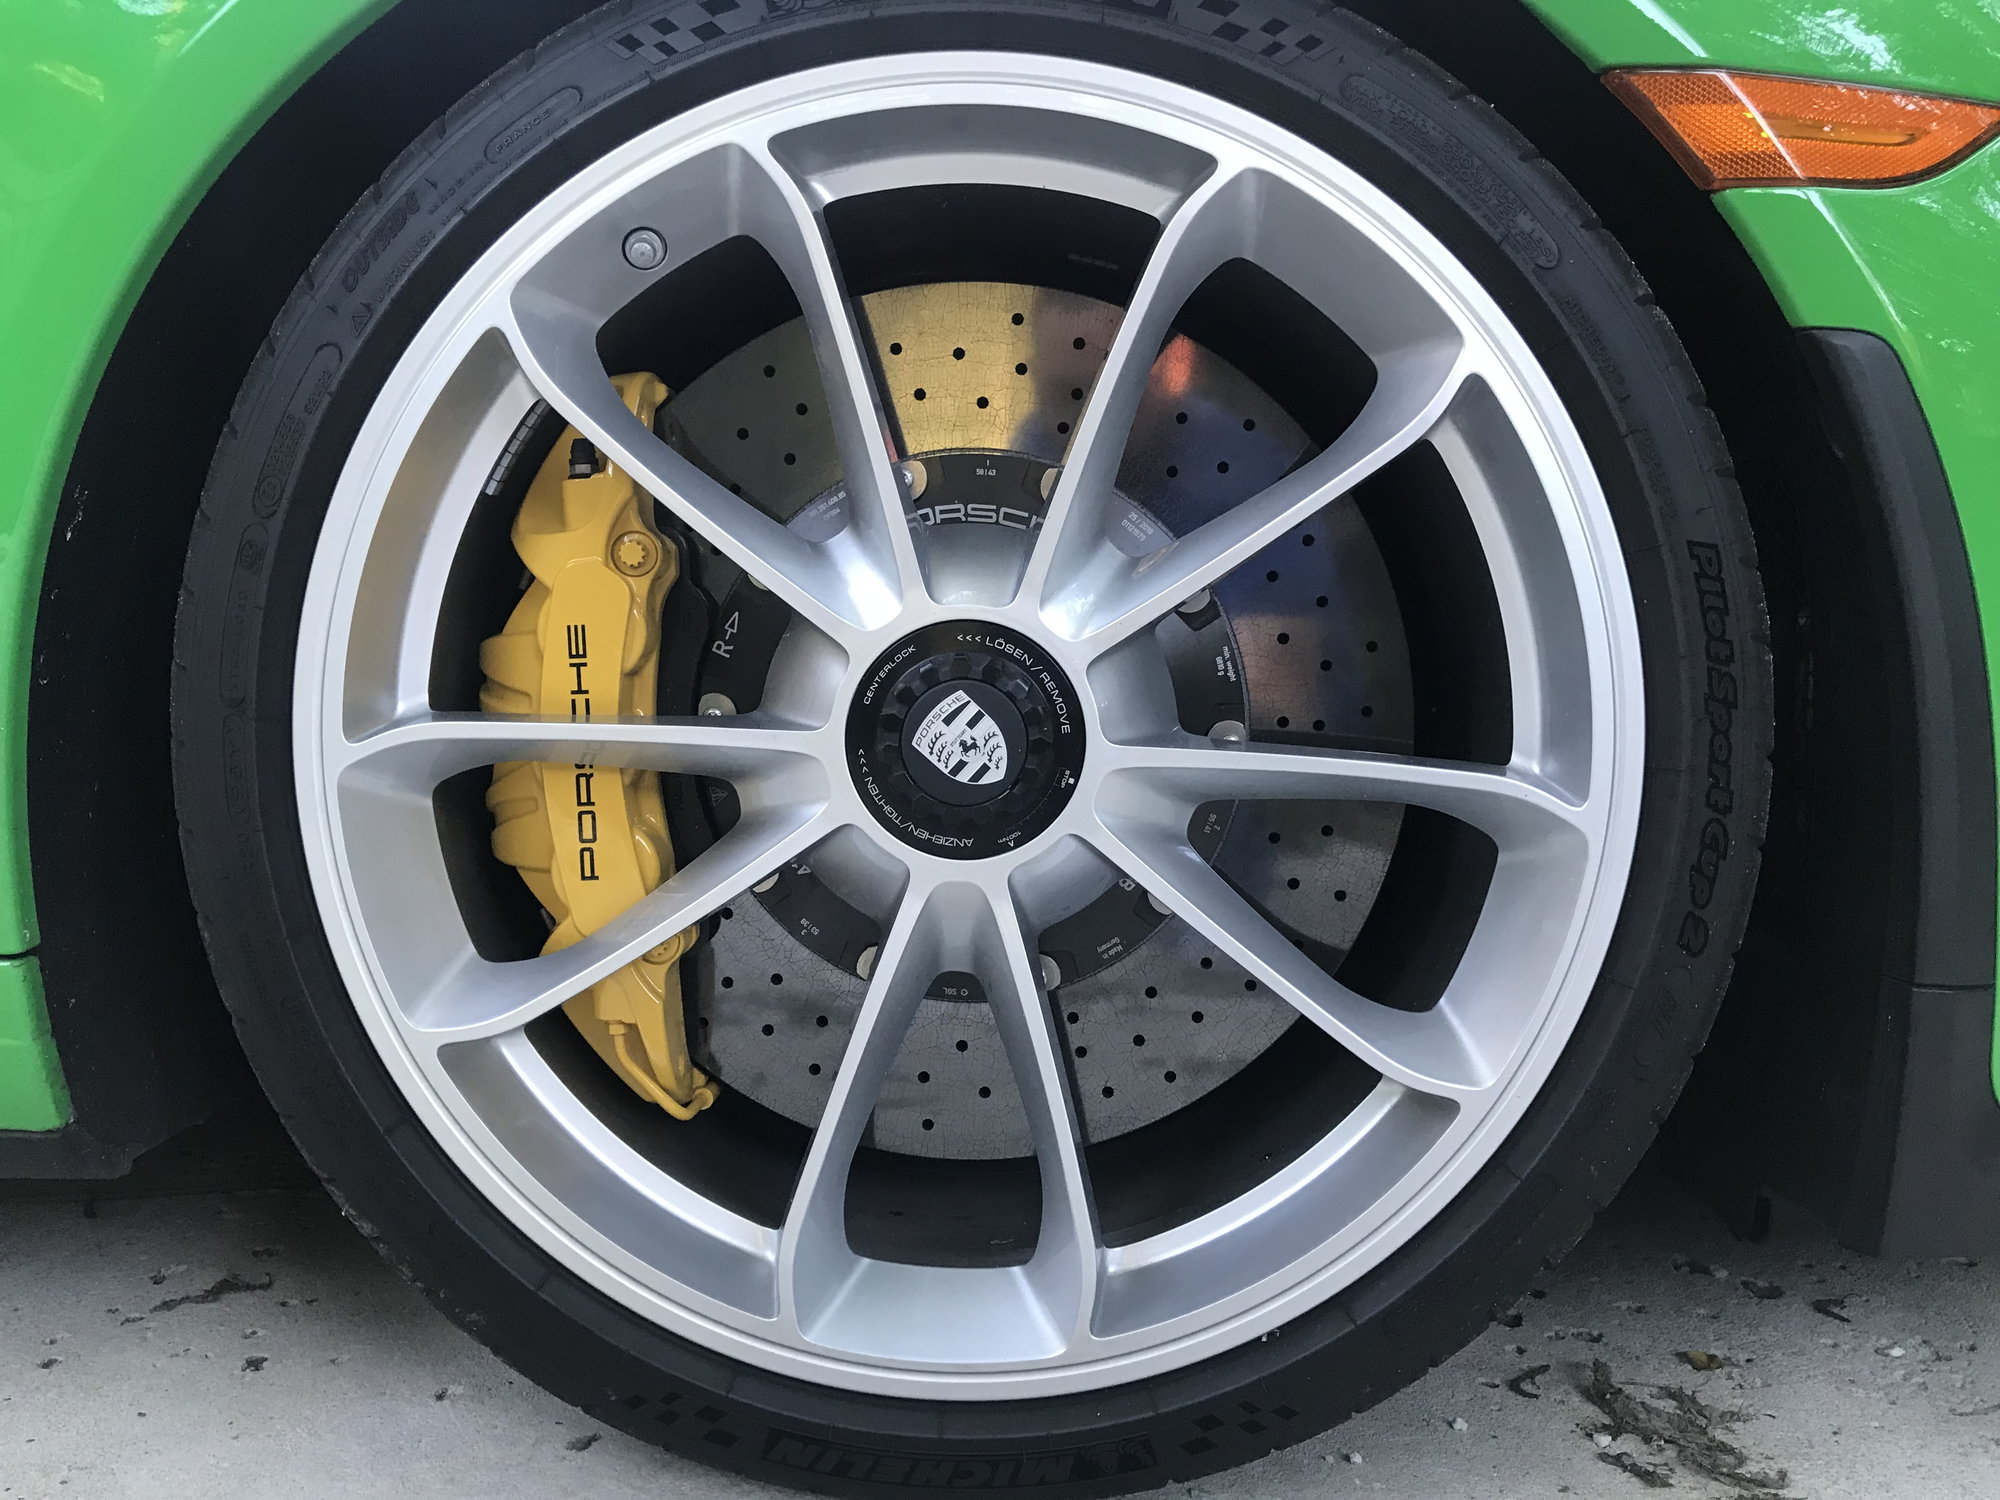 Wheels and Tires/Axles - FS: 2018 991.2 GT3 Stock OEM Silver Wheels / Rims Set - Used - 2014 to 2019 Porsche GT3 - Miami, FL 33133, United States